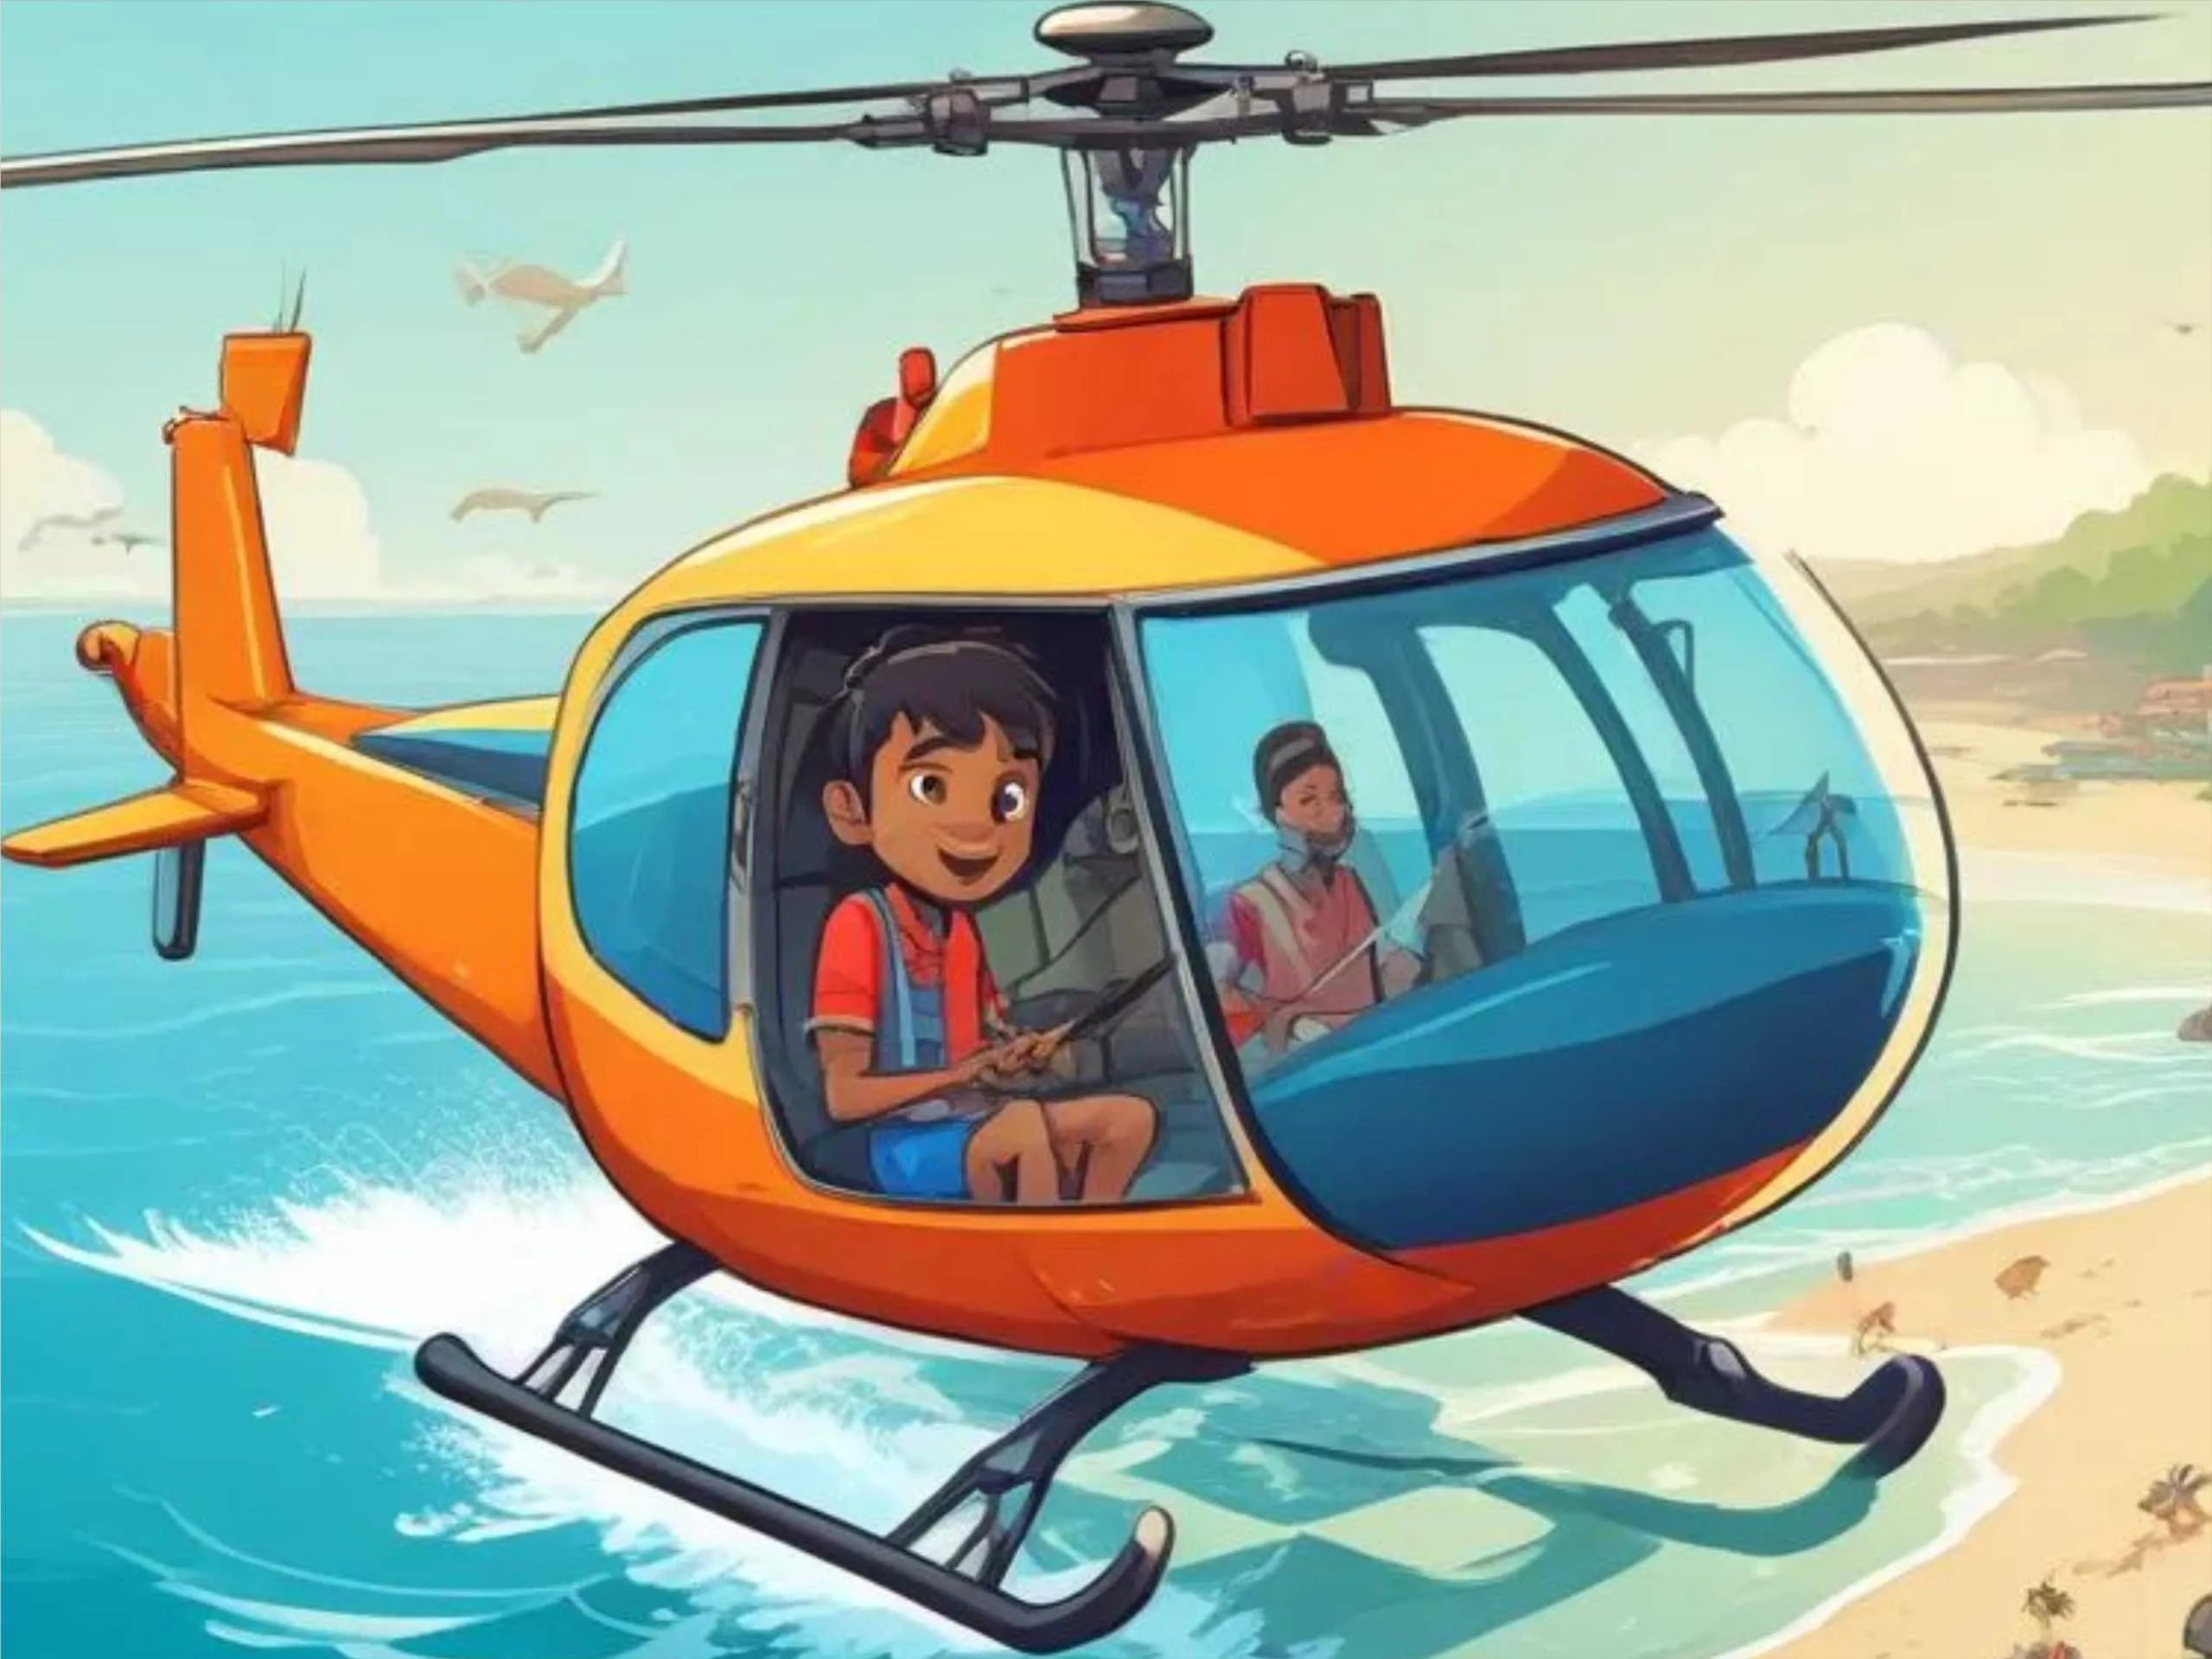 Cartoon image of a boy flying on helicopter